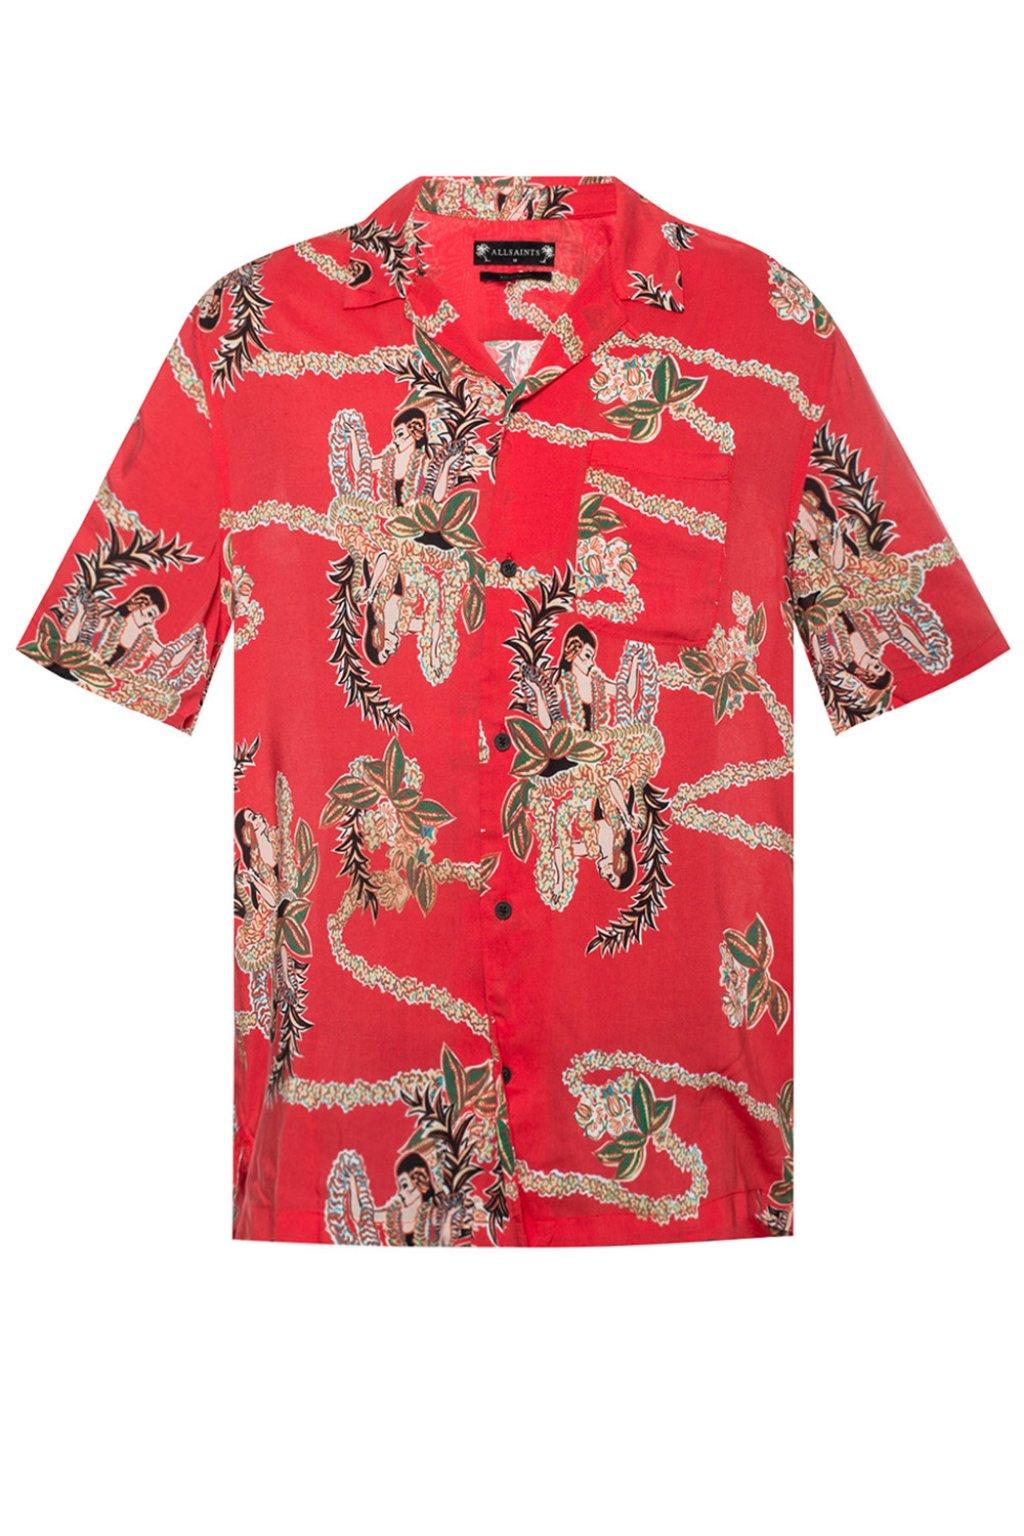 AllSaints Synthetic 'makalika' Graphic Shirt in Red for Men - Lyst